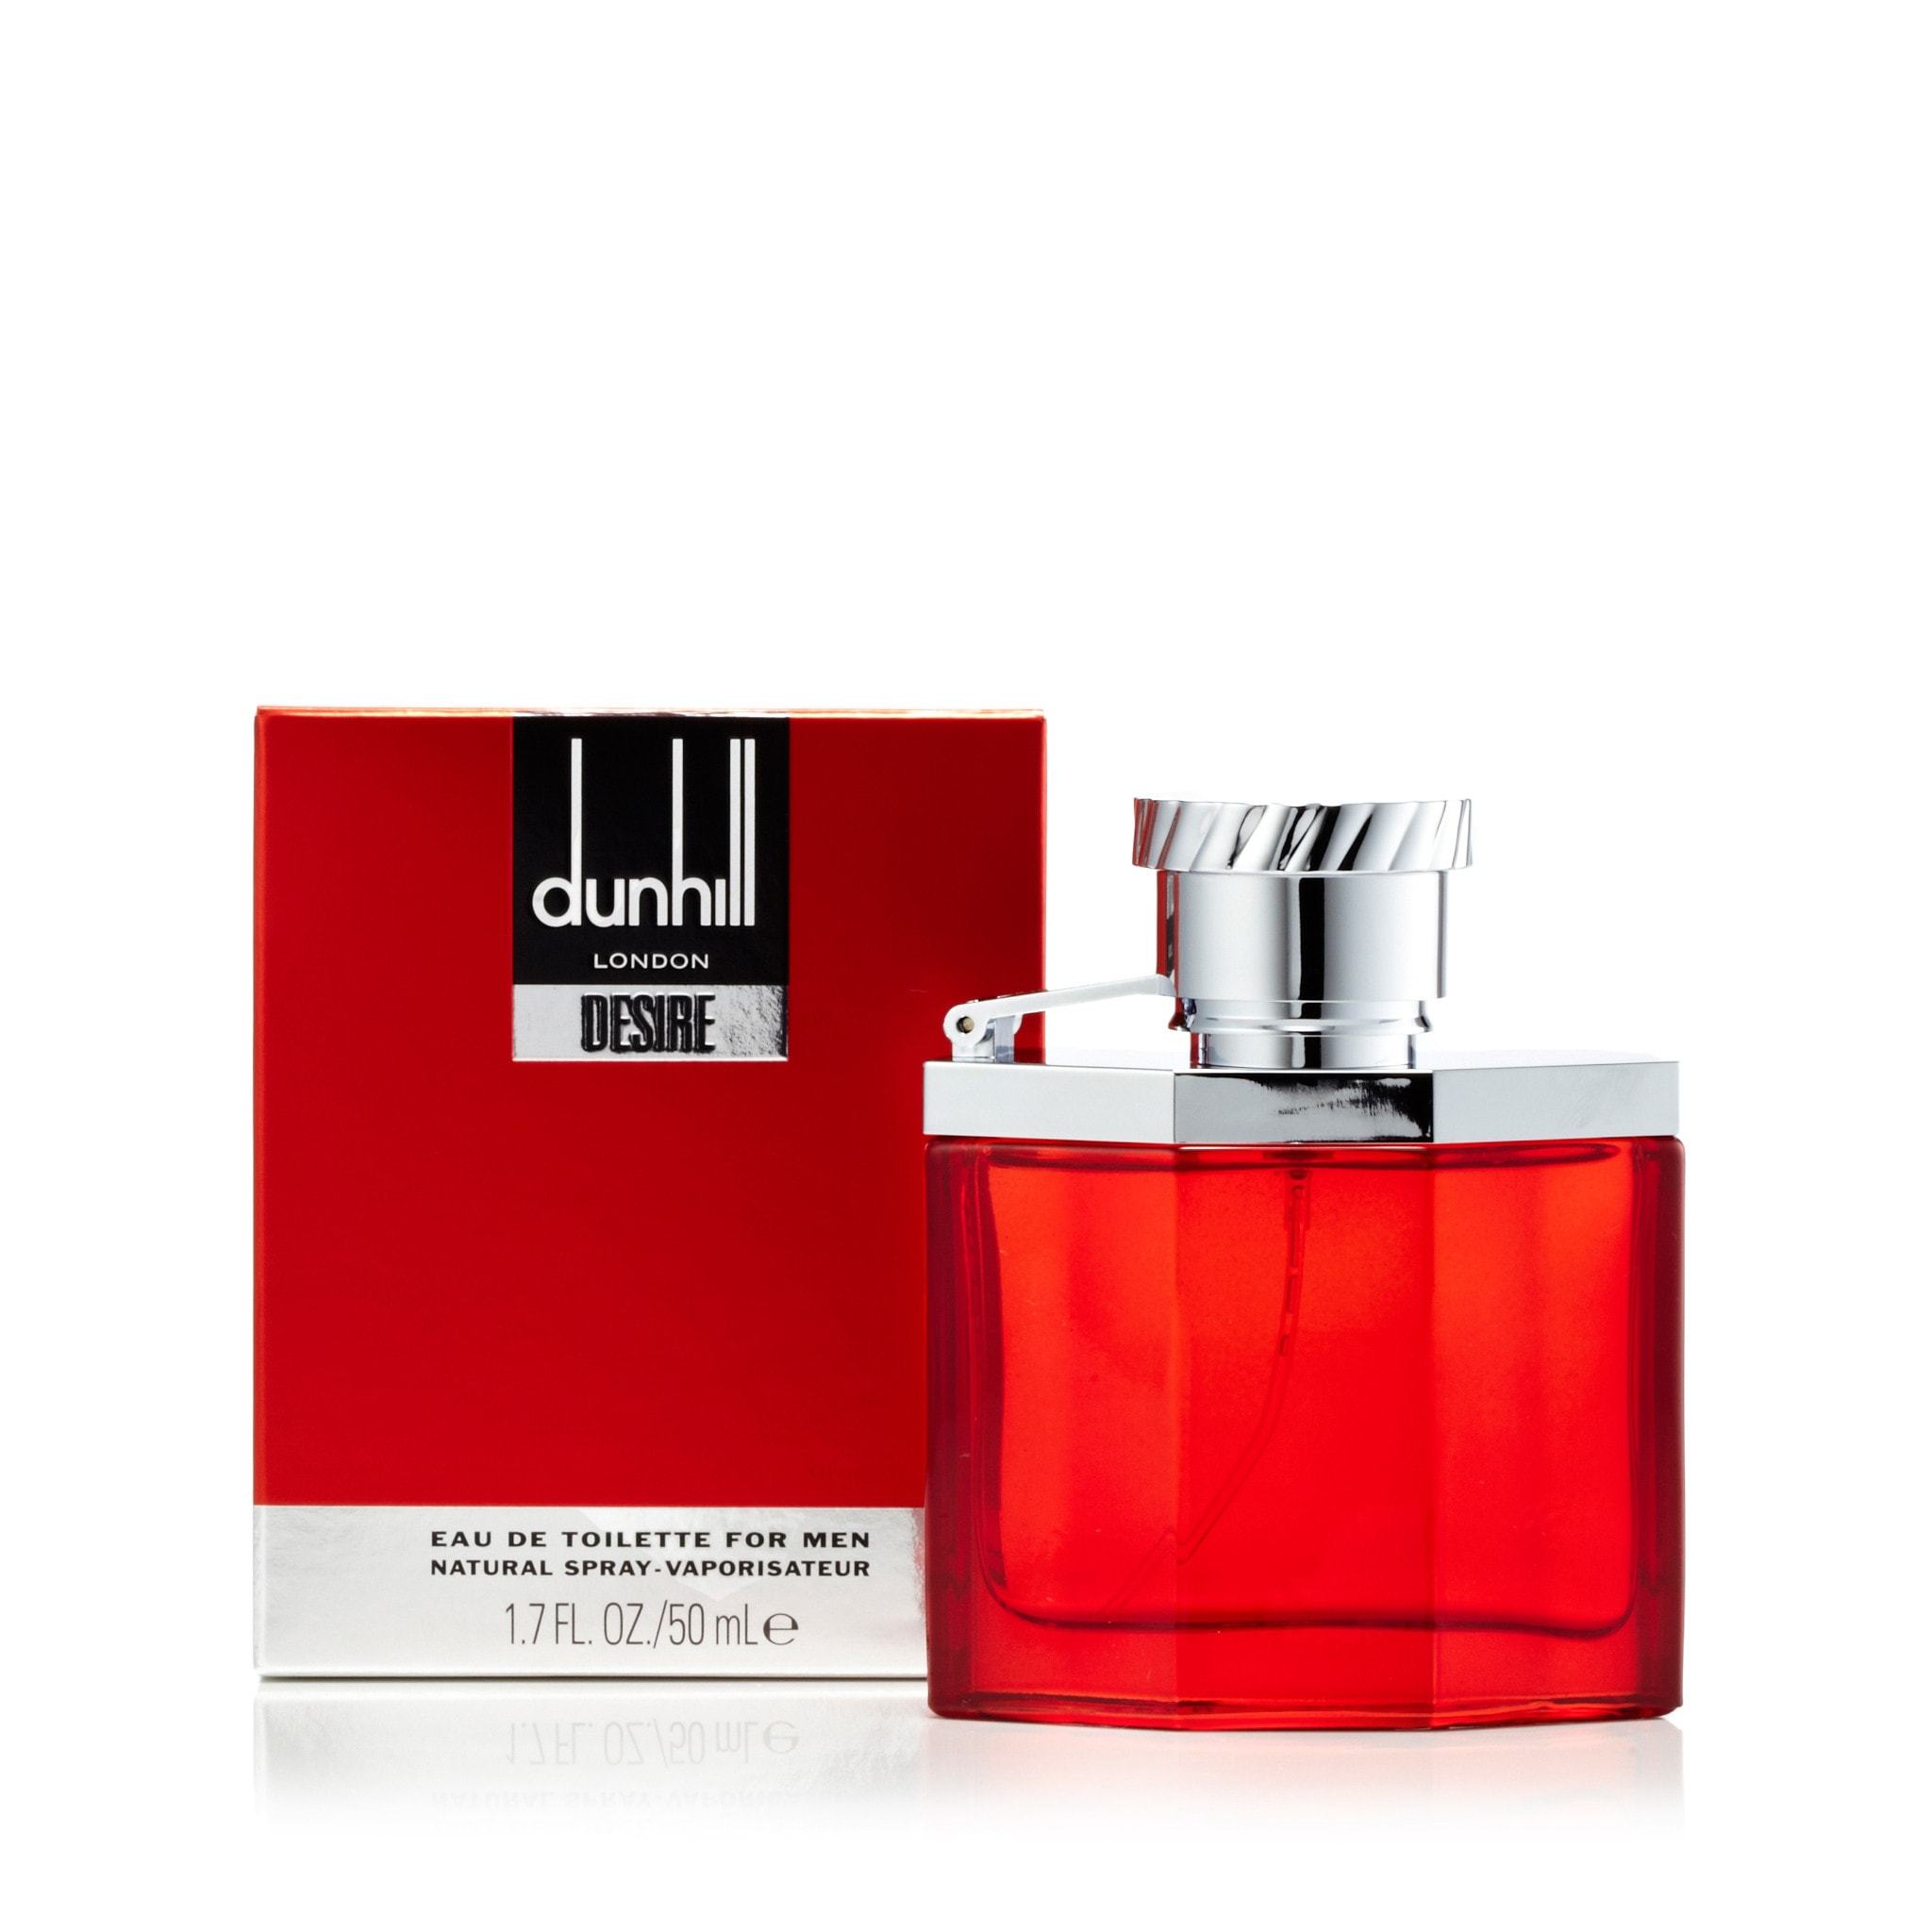 dunhill mens perfume Cheaper Than Retail Price> Buy Clothing ...